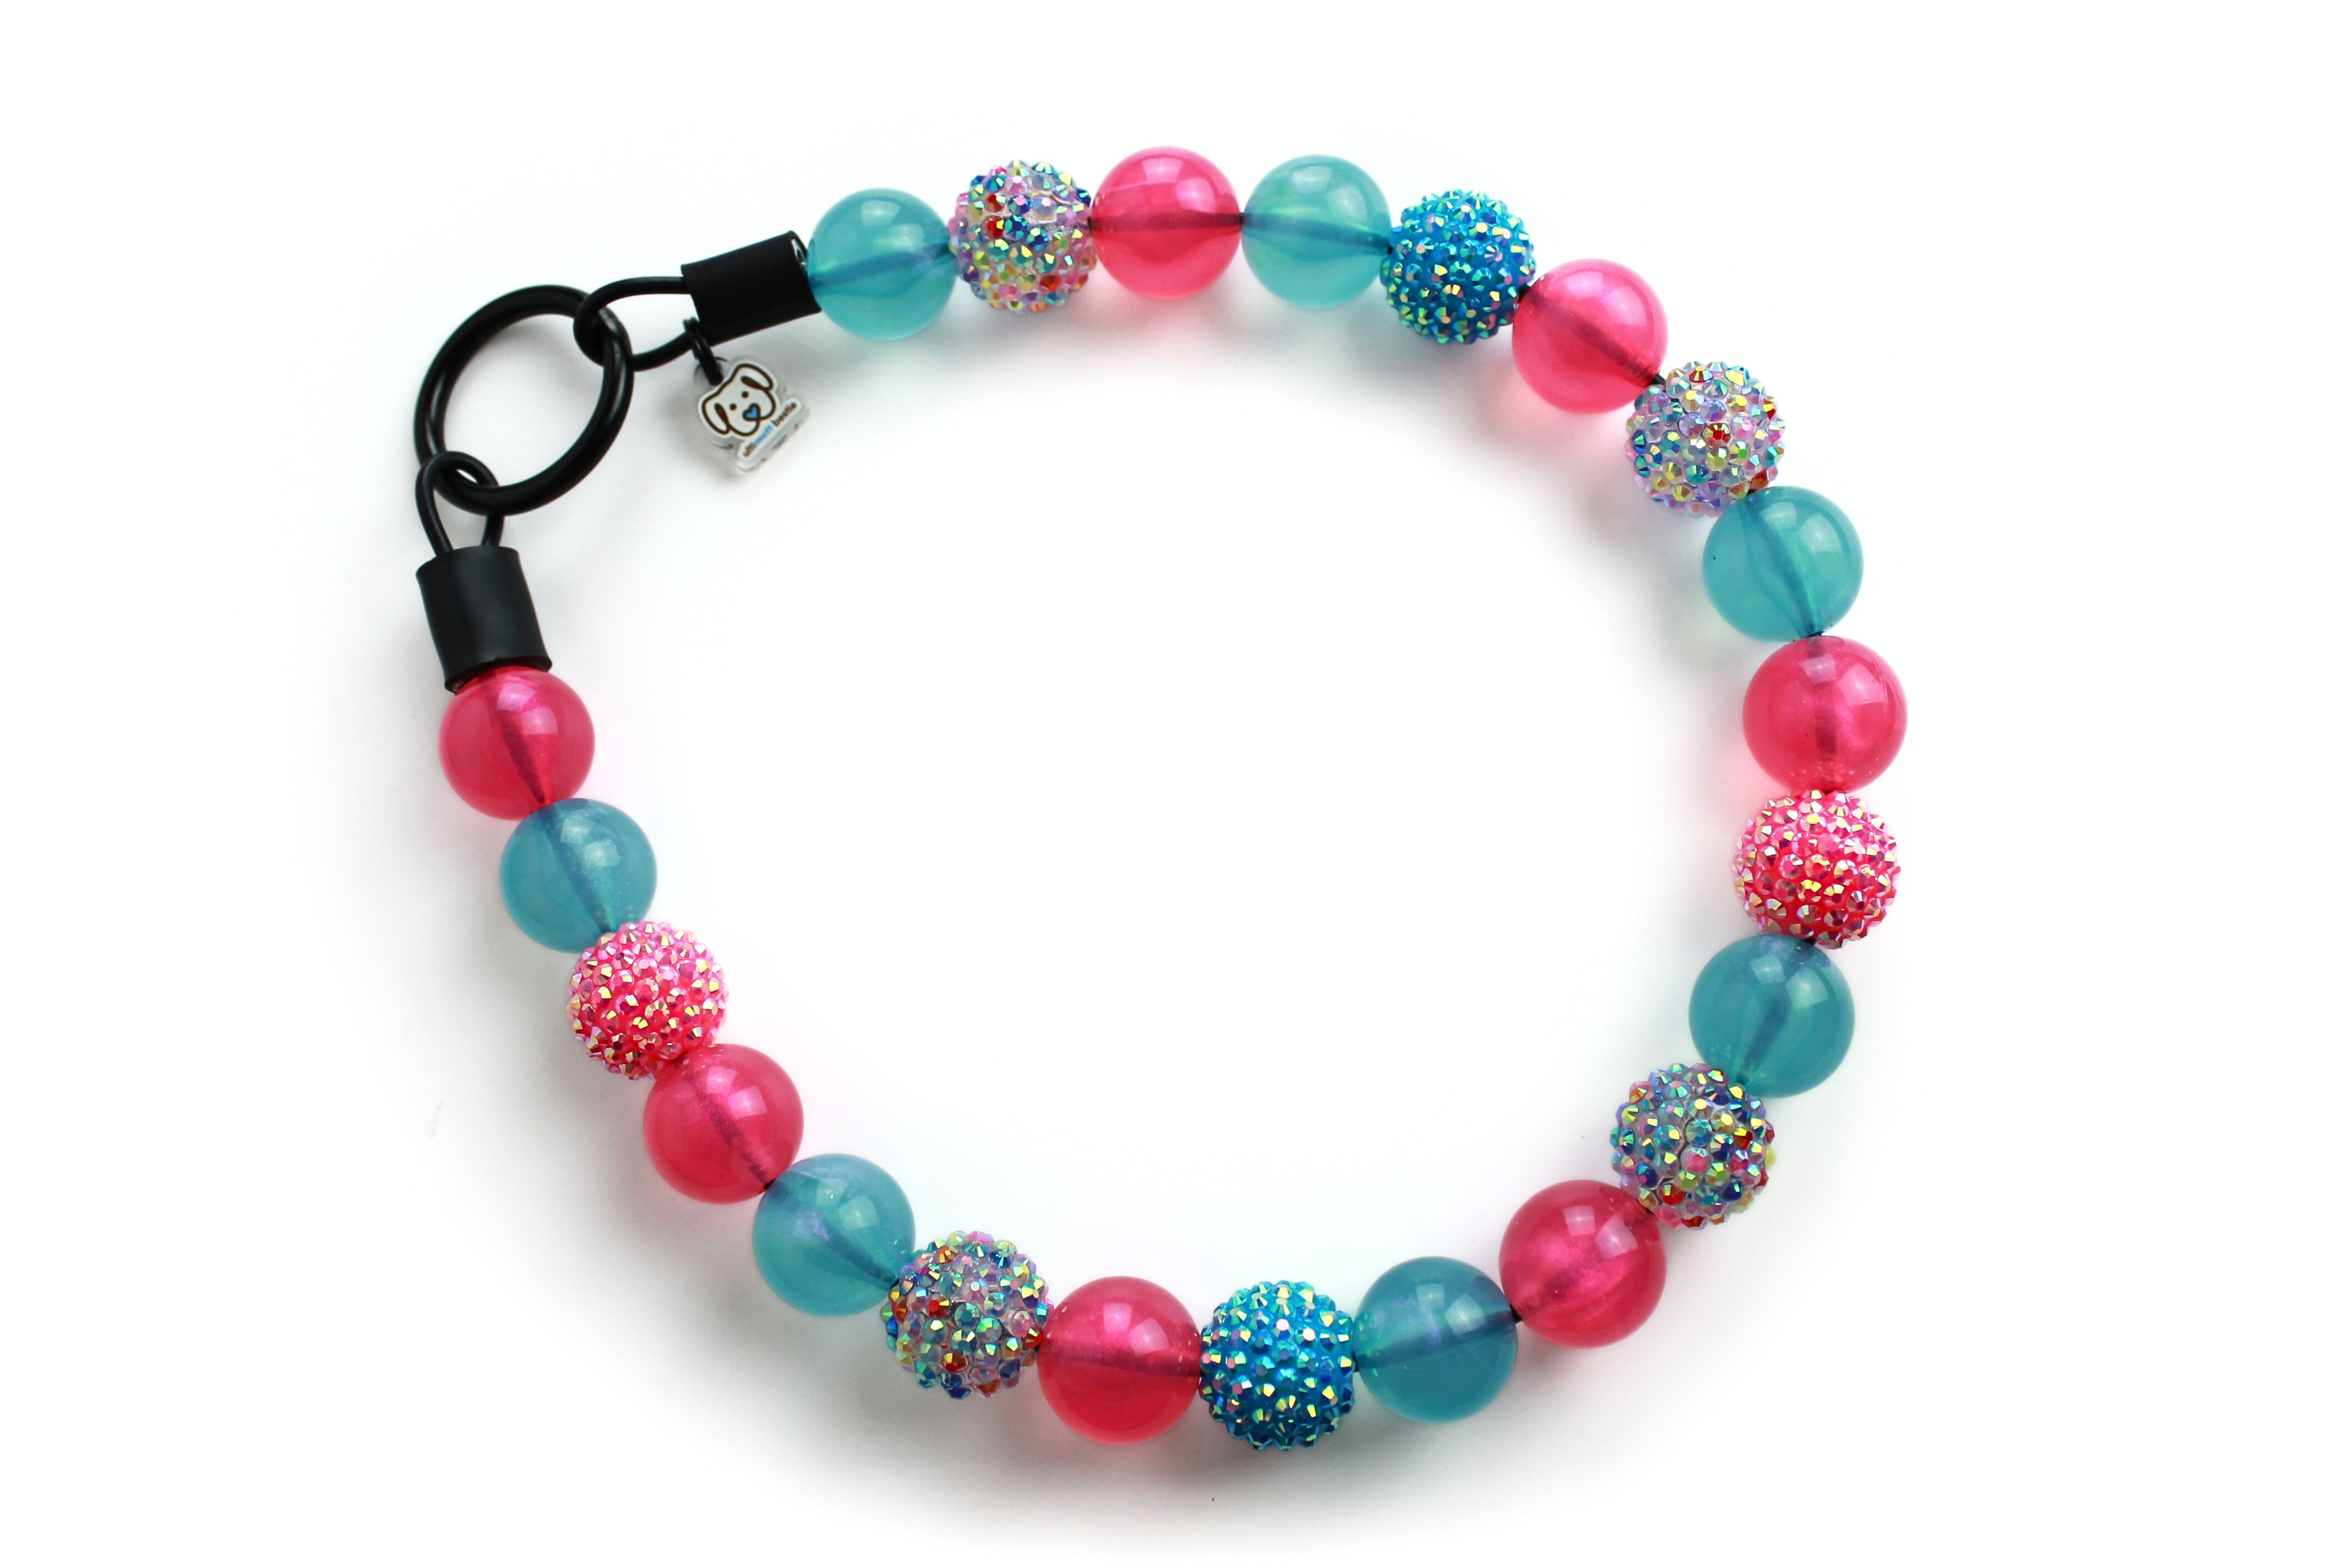 Island splash dog bead collar with jelly aqua, hot pink and pink, aqua and multi color rhinestone beads with an O ring closure